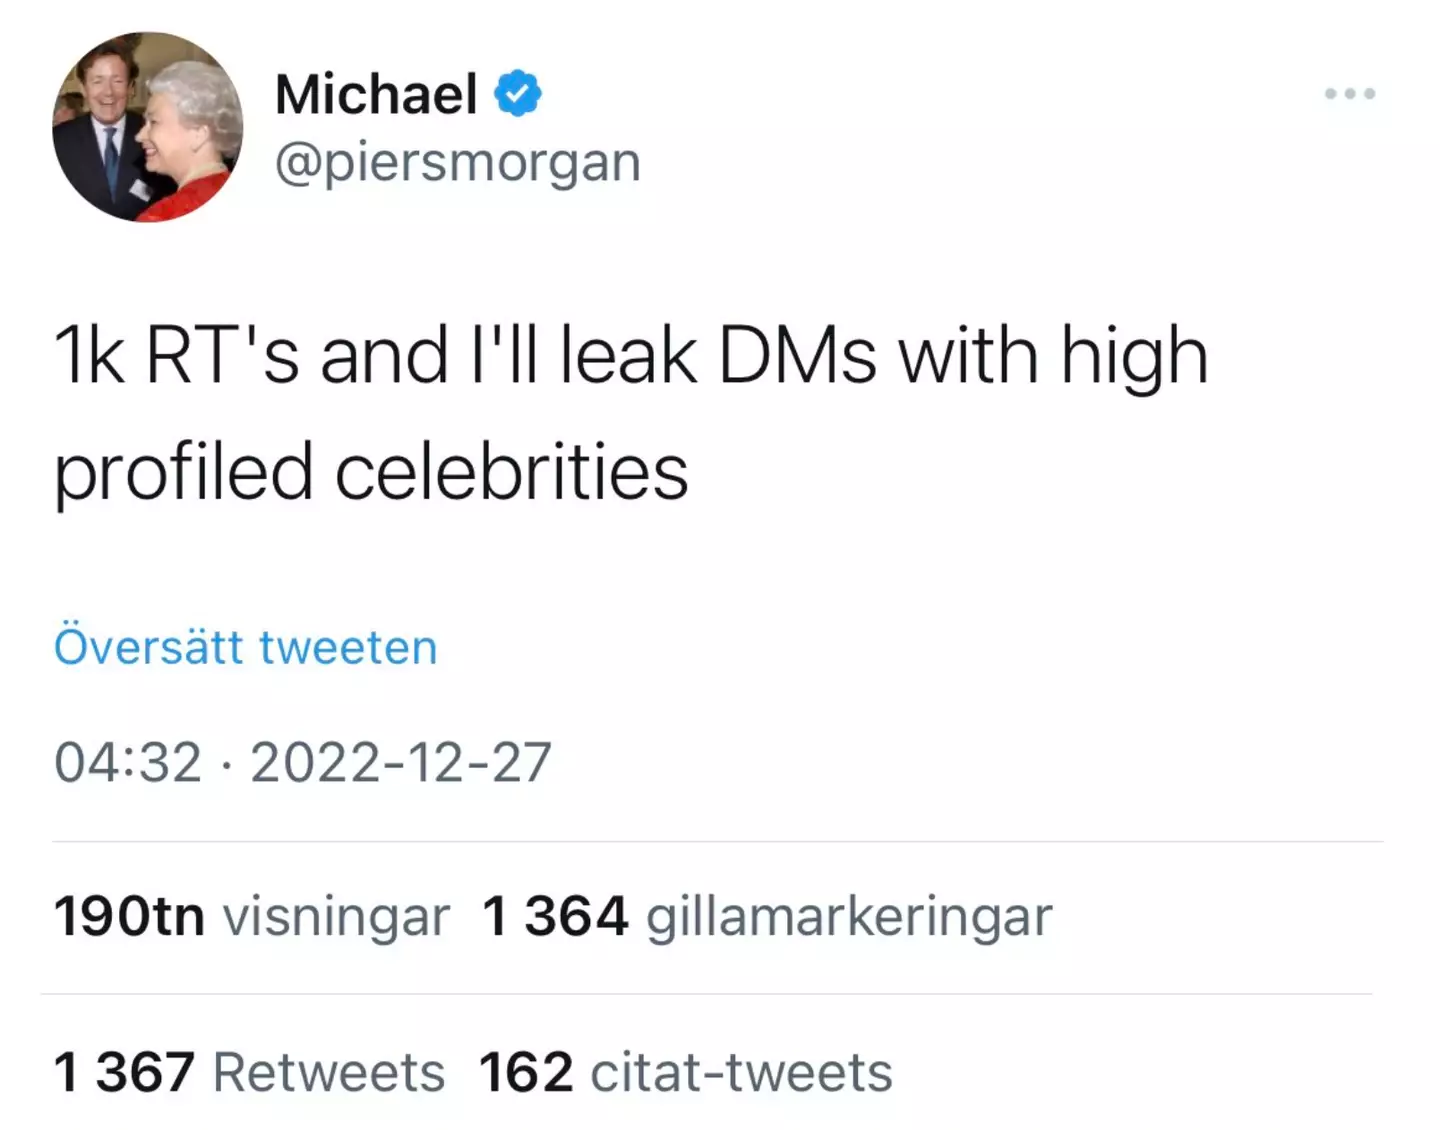 The hacker threatened to leak Piers Morgan's DMs with celebrities.